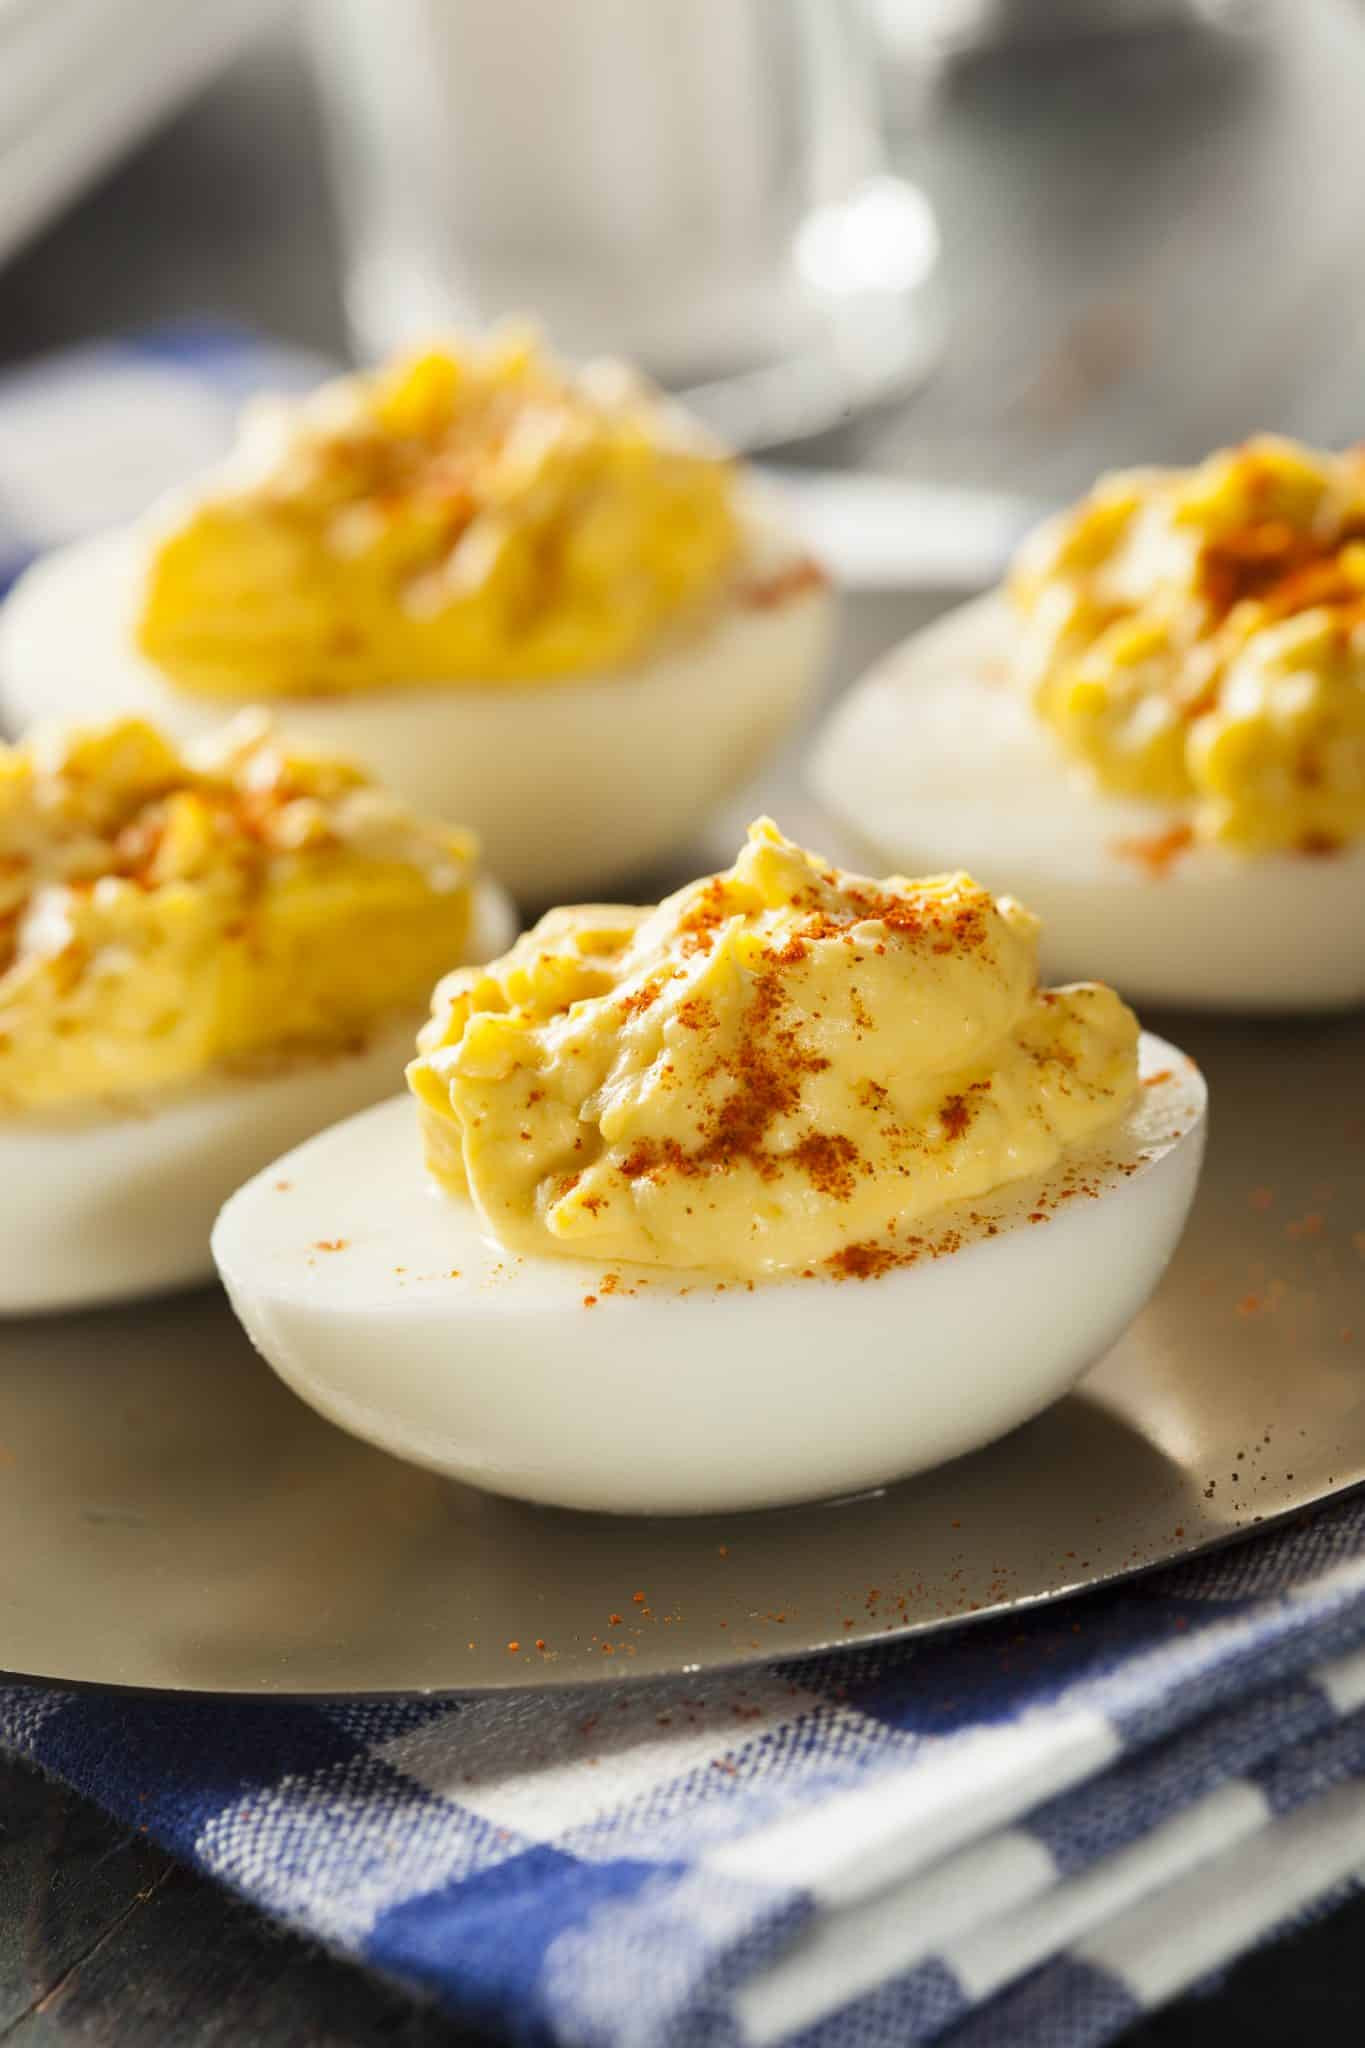 Pictures Of Deviled Eggs Inspirational the Best Ever Deviled Eggs the Country Cook